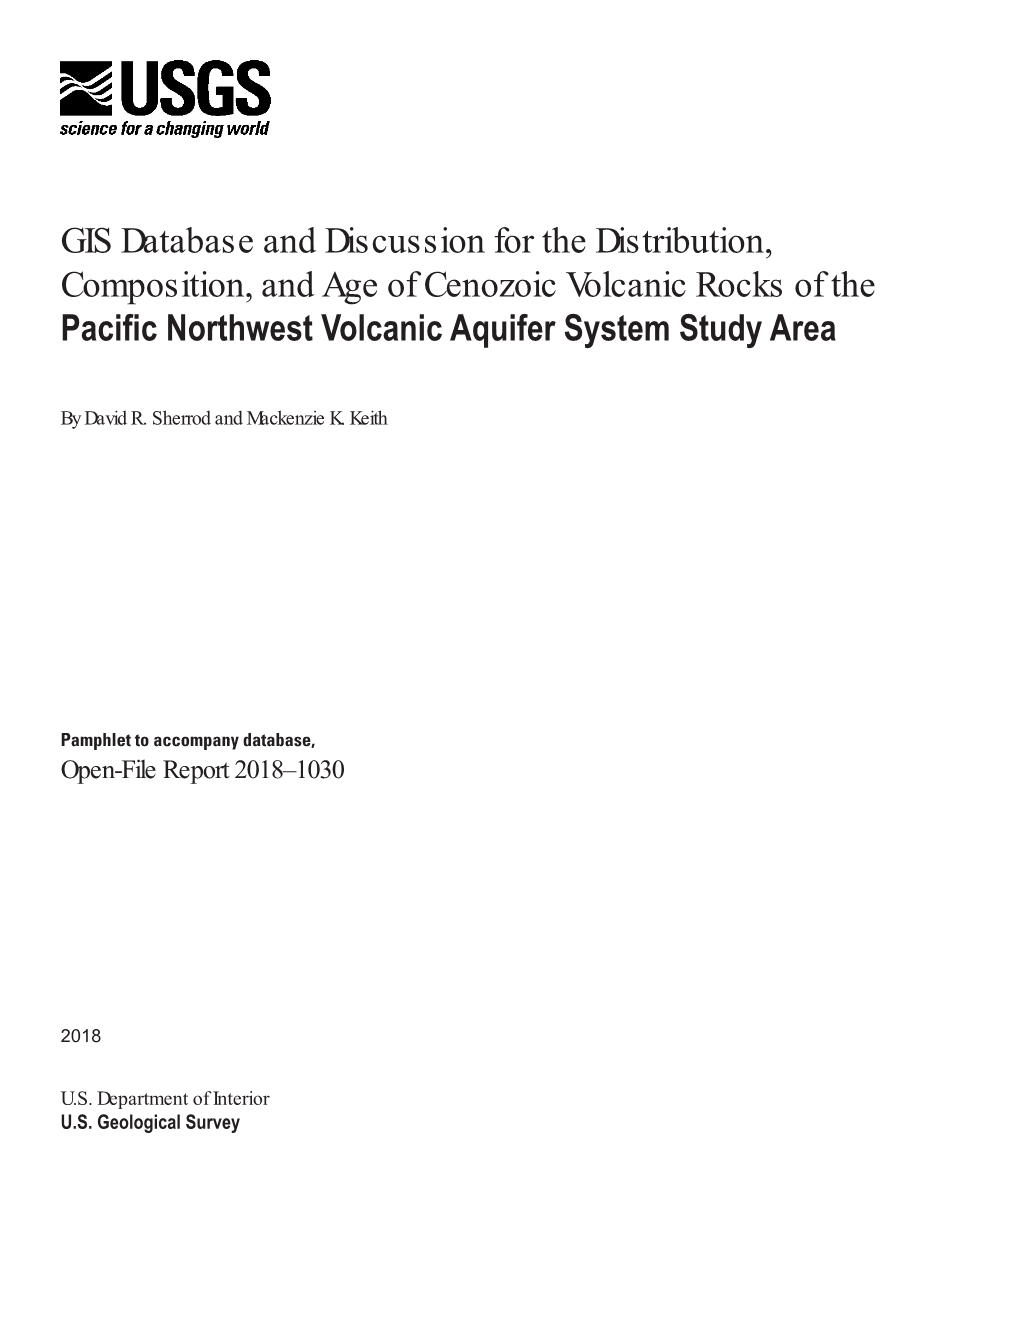 GIS Database and Discussion for the Distribution, Composition, and Age of Cenozoic Volcanic Rocks of the Pacific Northwest Volcanic Aquifer System Study Area